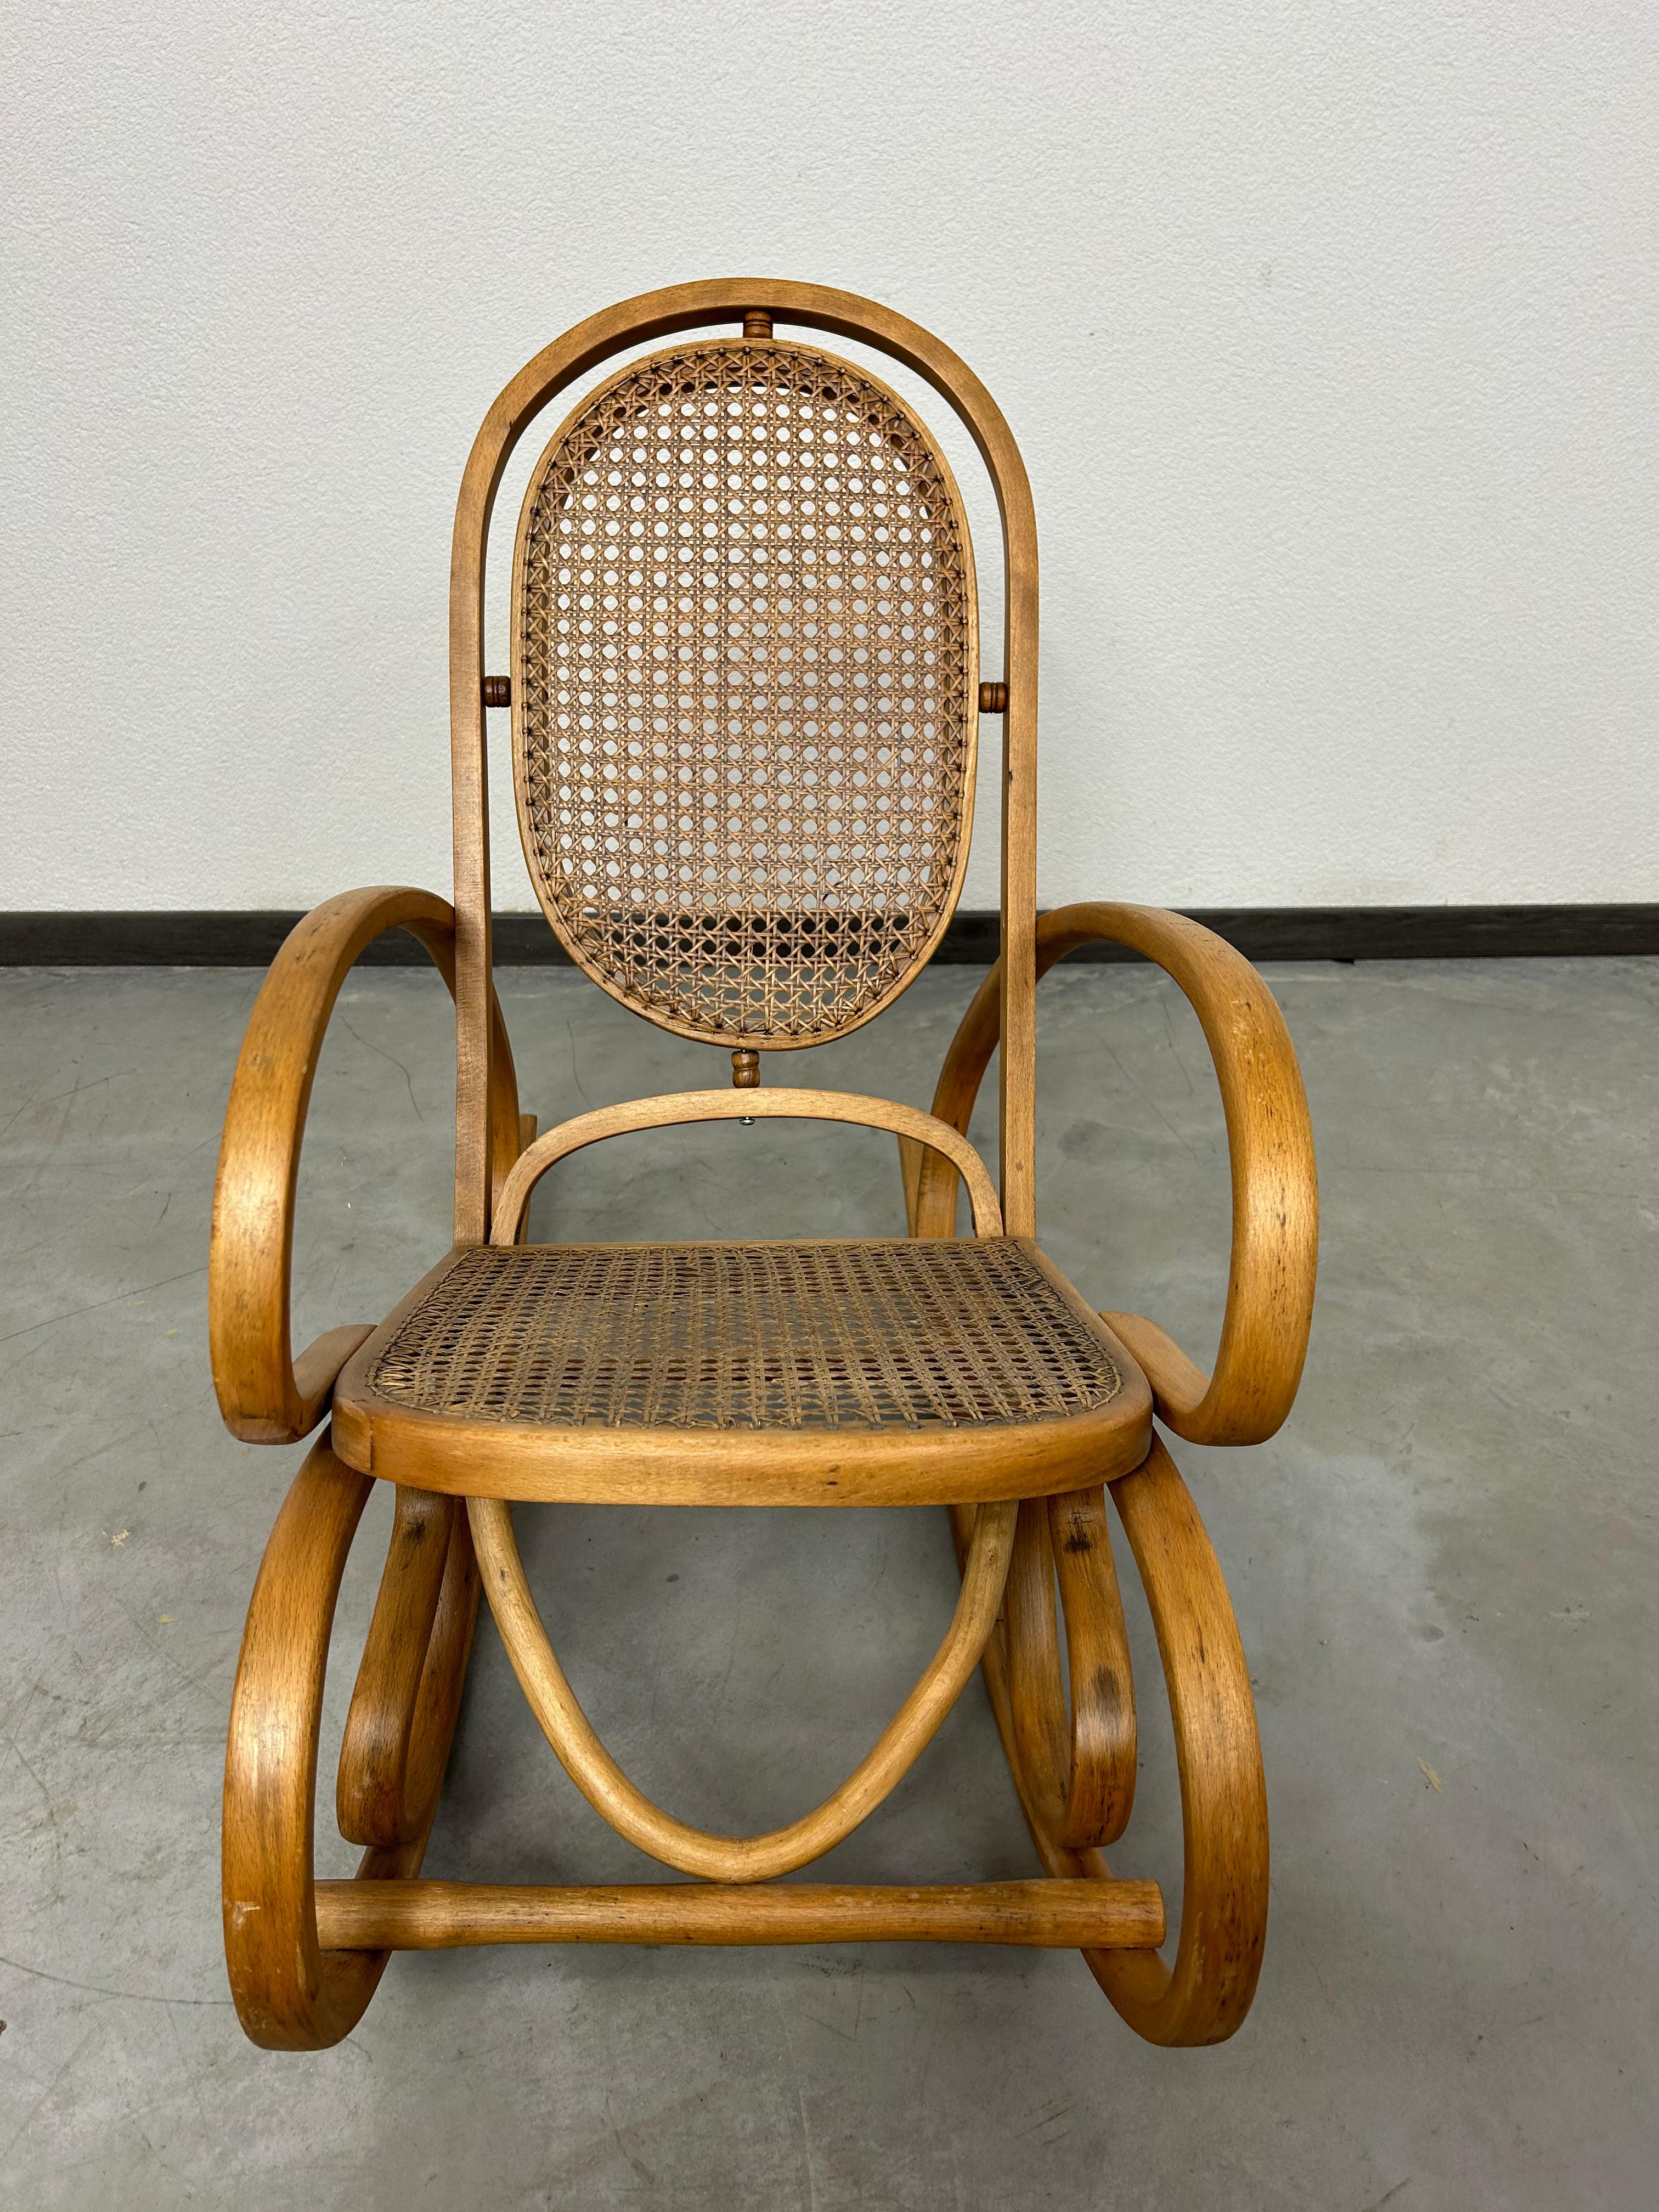 Vienna secession rocking chair for children in very nice original condition.